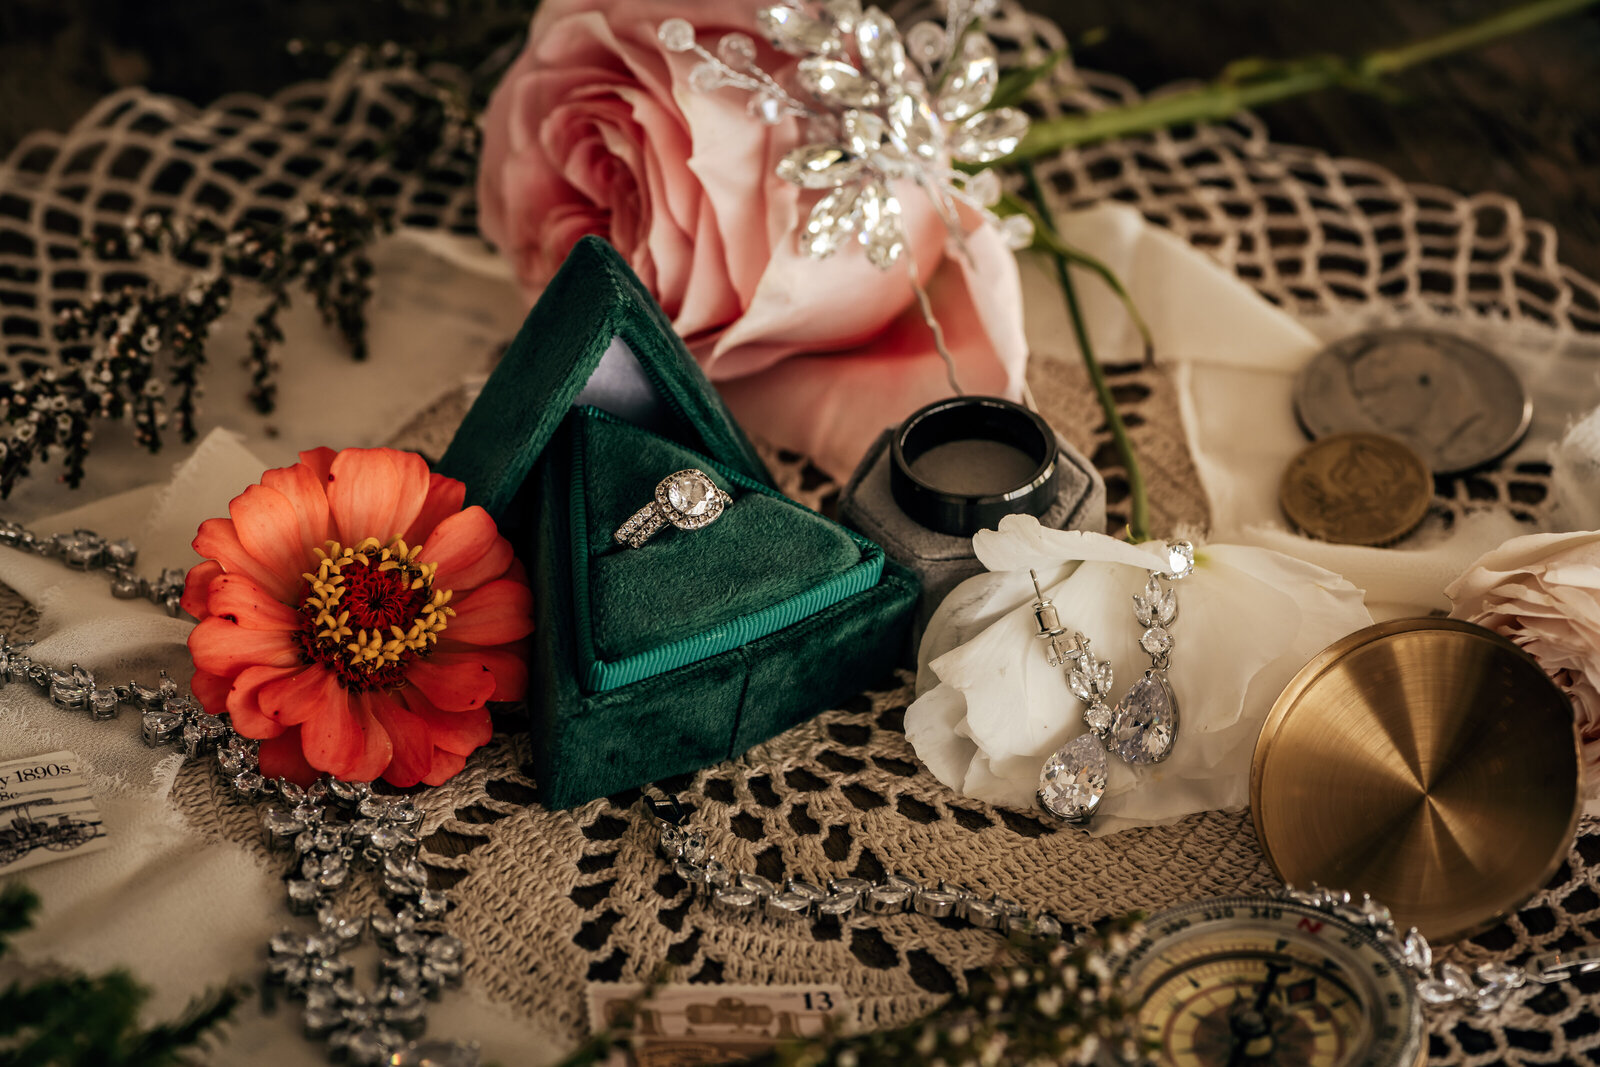 The wedding details that matter. Florals, wedding rings and jewelry